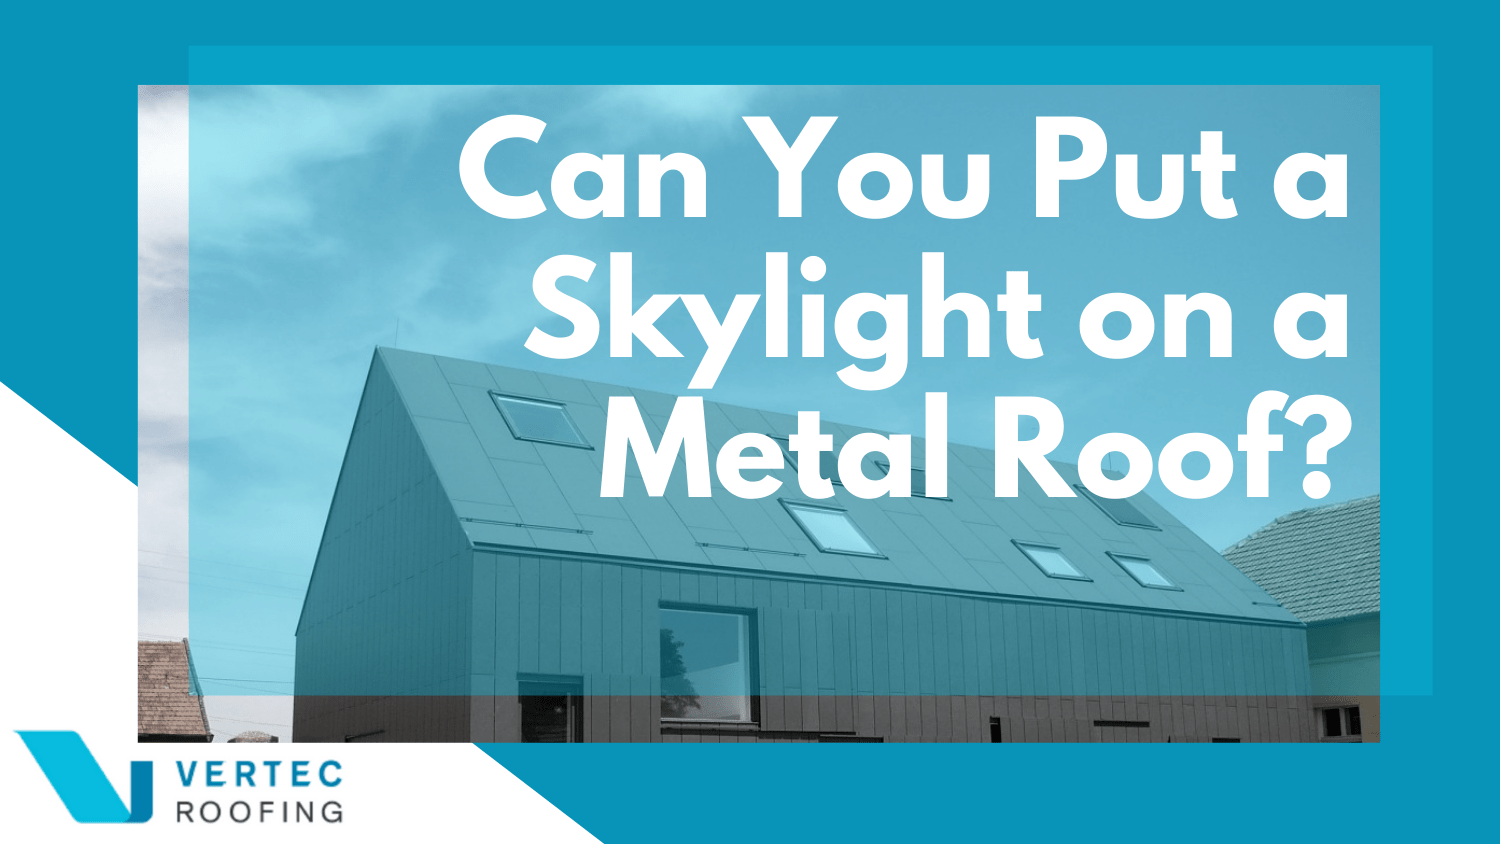 Can You Put a Skylight on a Metal Roof?